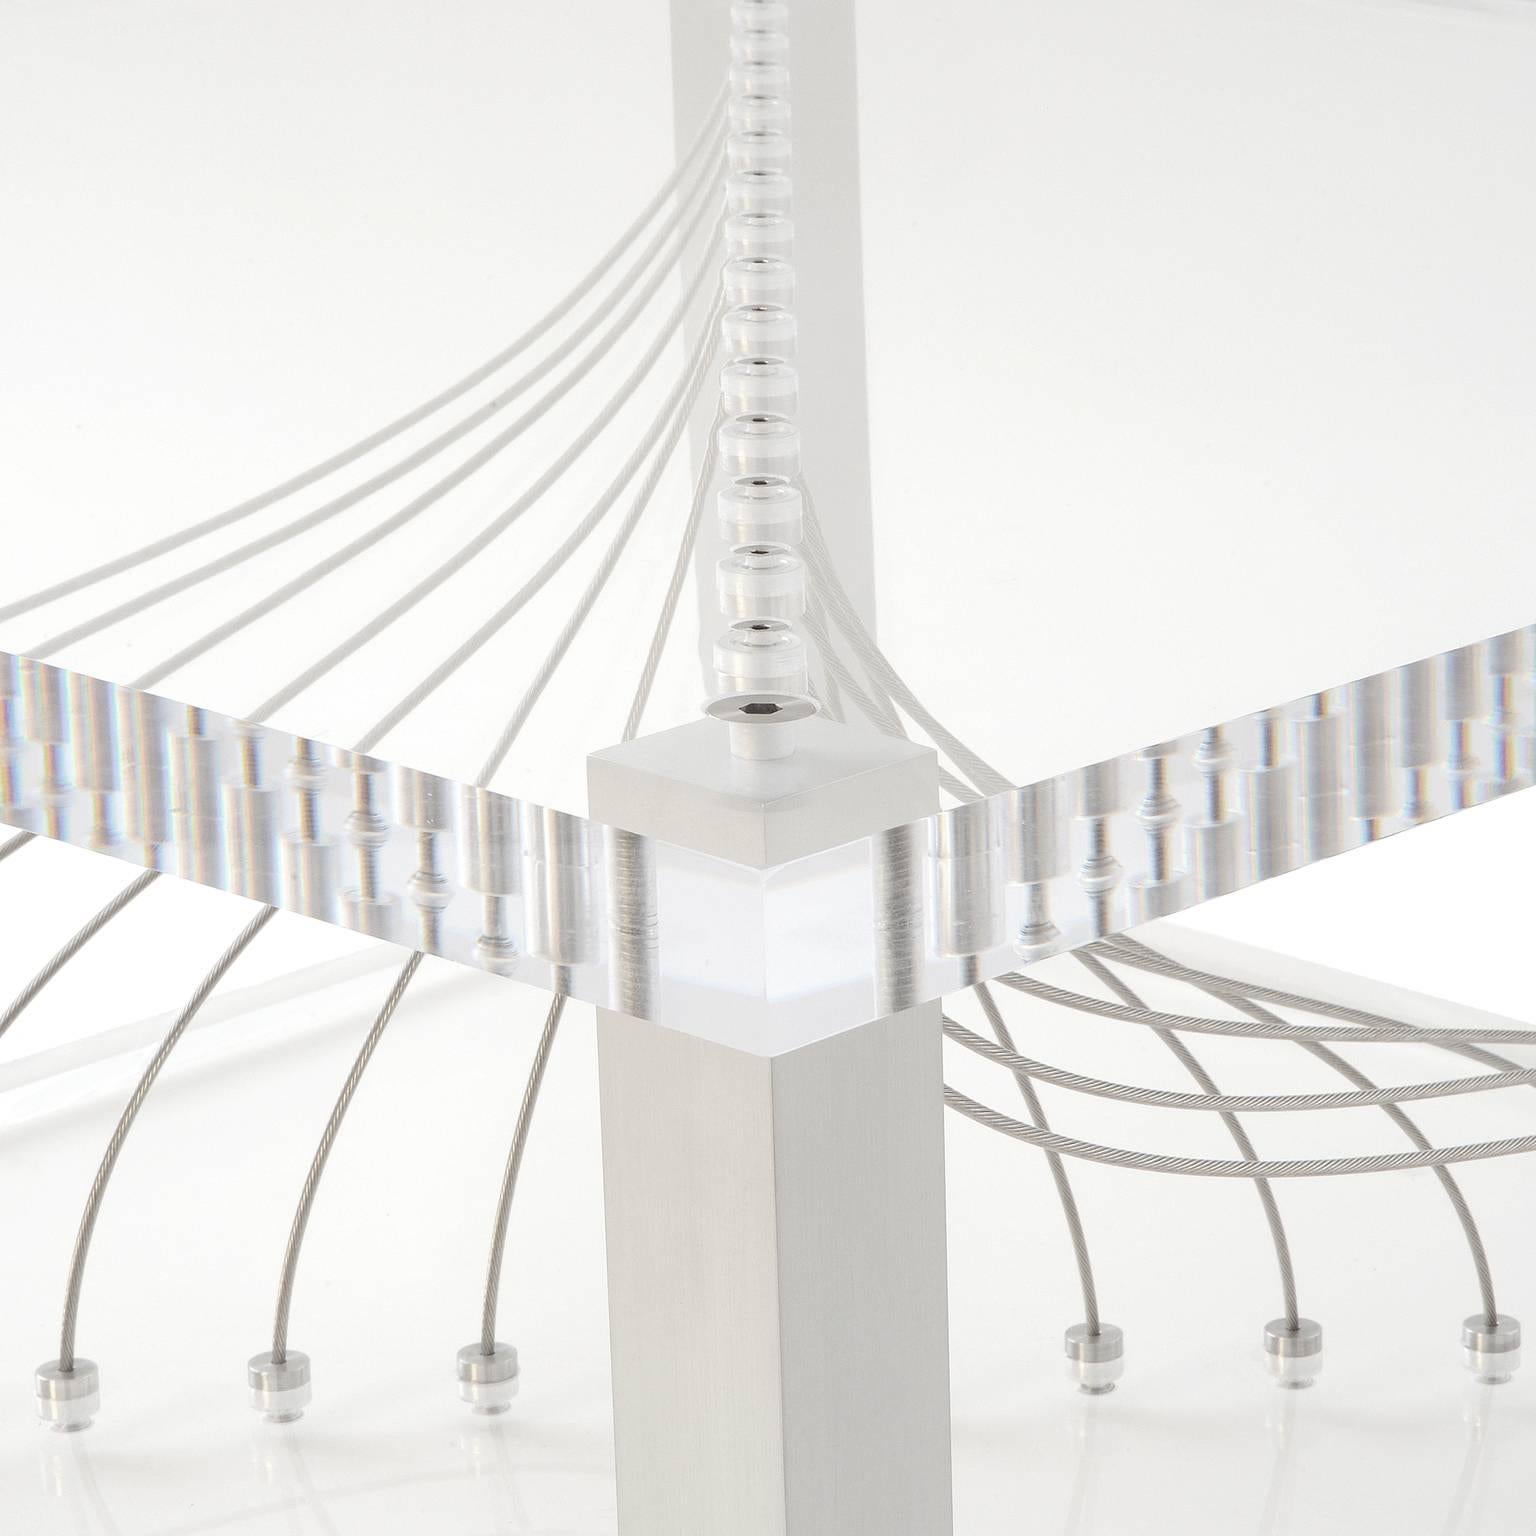 Acrylic Argon by Peter Harrison is a stunning coffee table made from 1.5 inch thick acrylic, aluminum and stainless steel cable. The cables are individually integrated to create an amazing visual experience. The cables flex as they are touched, yet